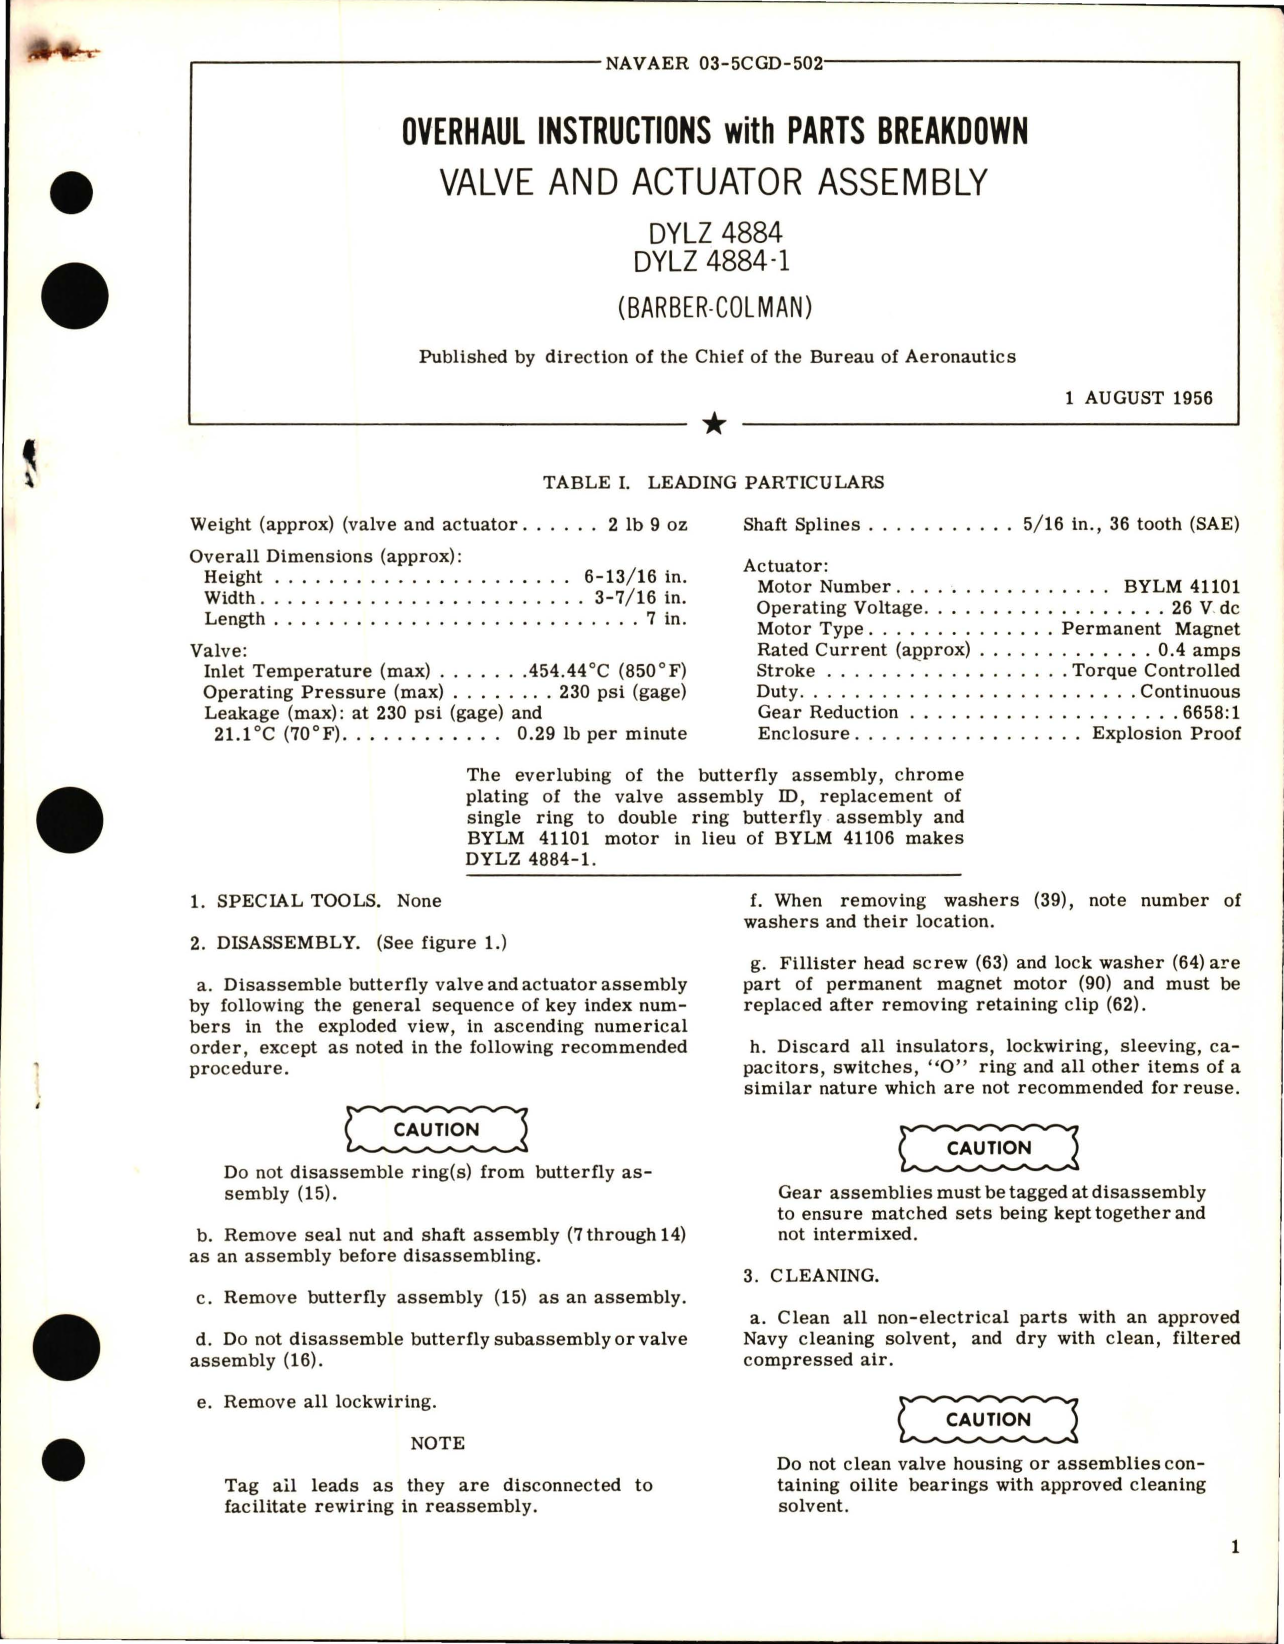 Sample page 1 from AirCorps Library document: Overhaul Instructions with Parts Breakdown for Valve and Actuator Assembly - DYLZ 4884 and DYLZ 4884-1 